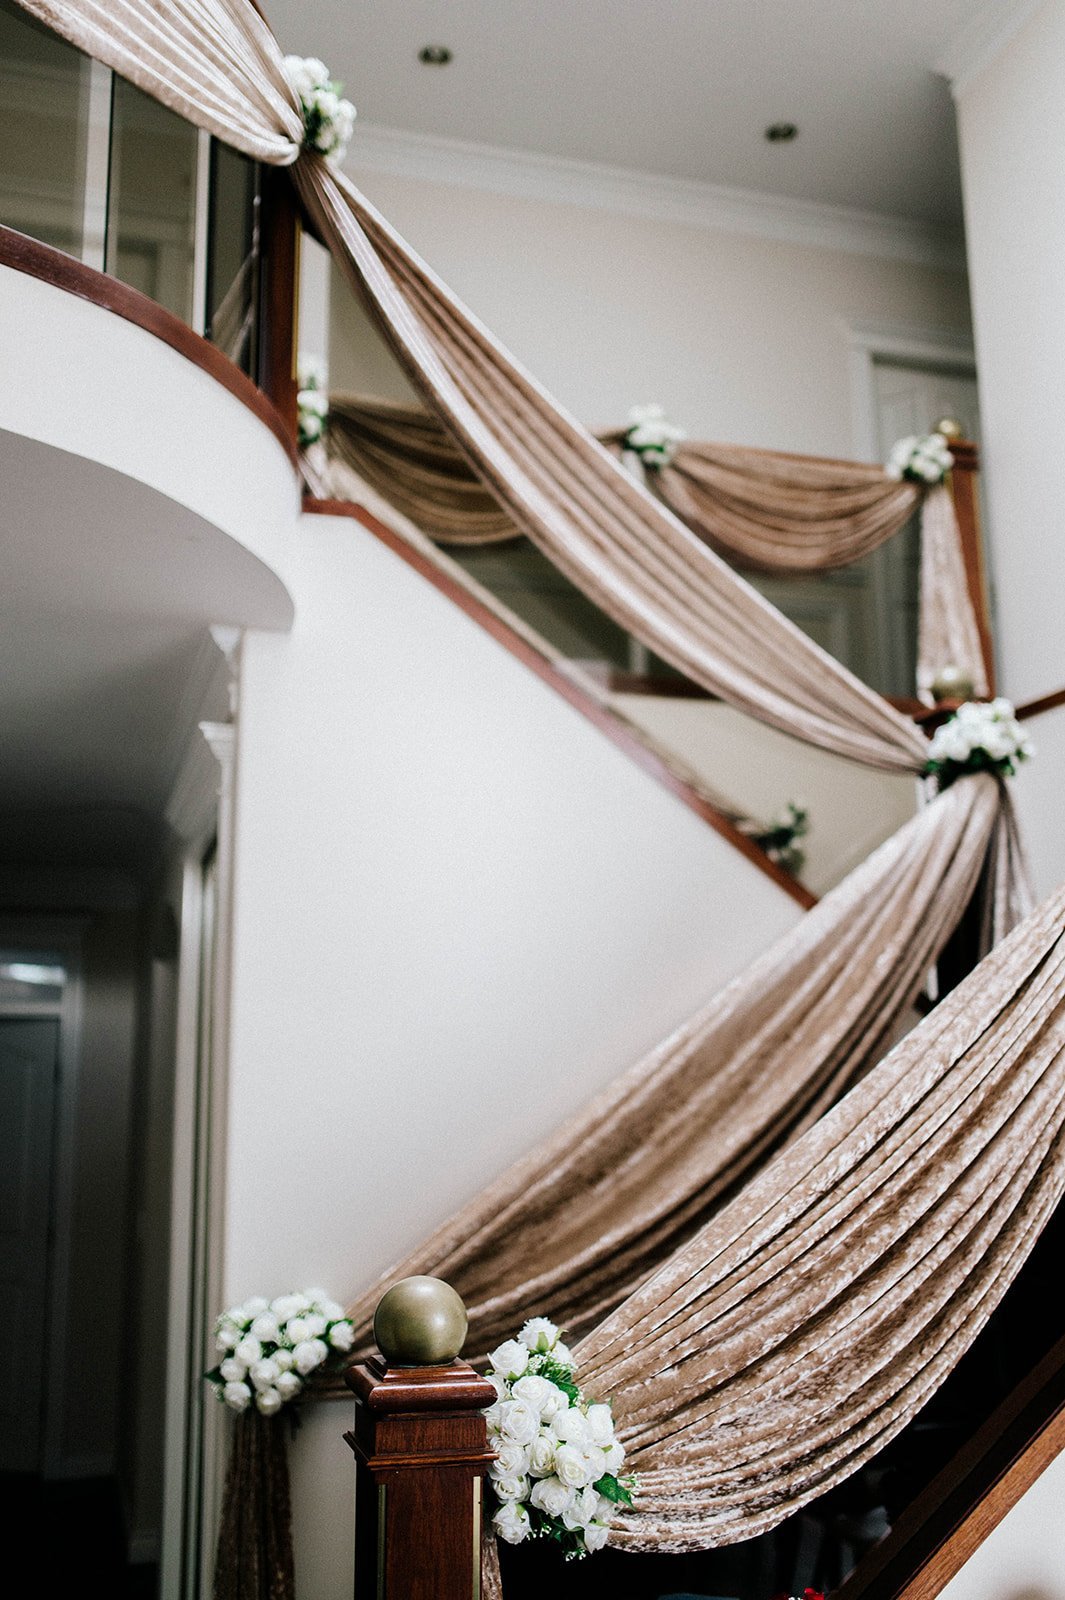 Bridal decorations and fabric drape a banister in the bride's home